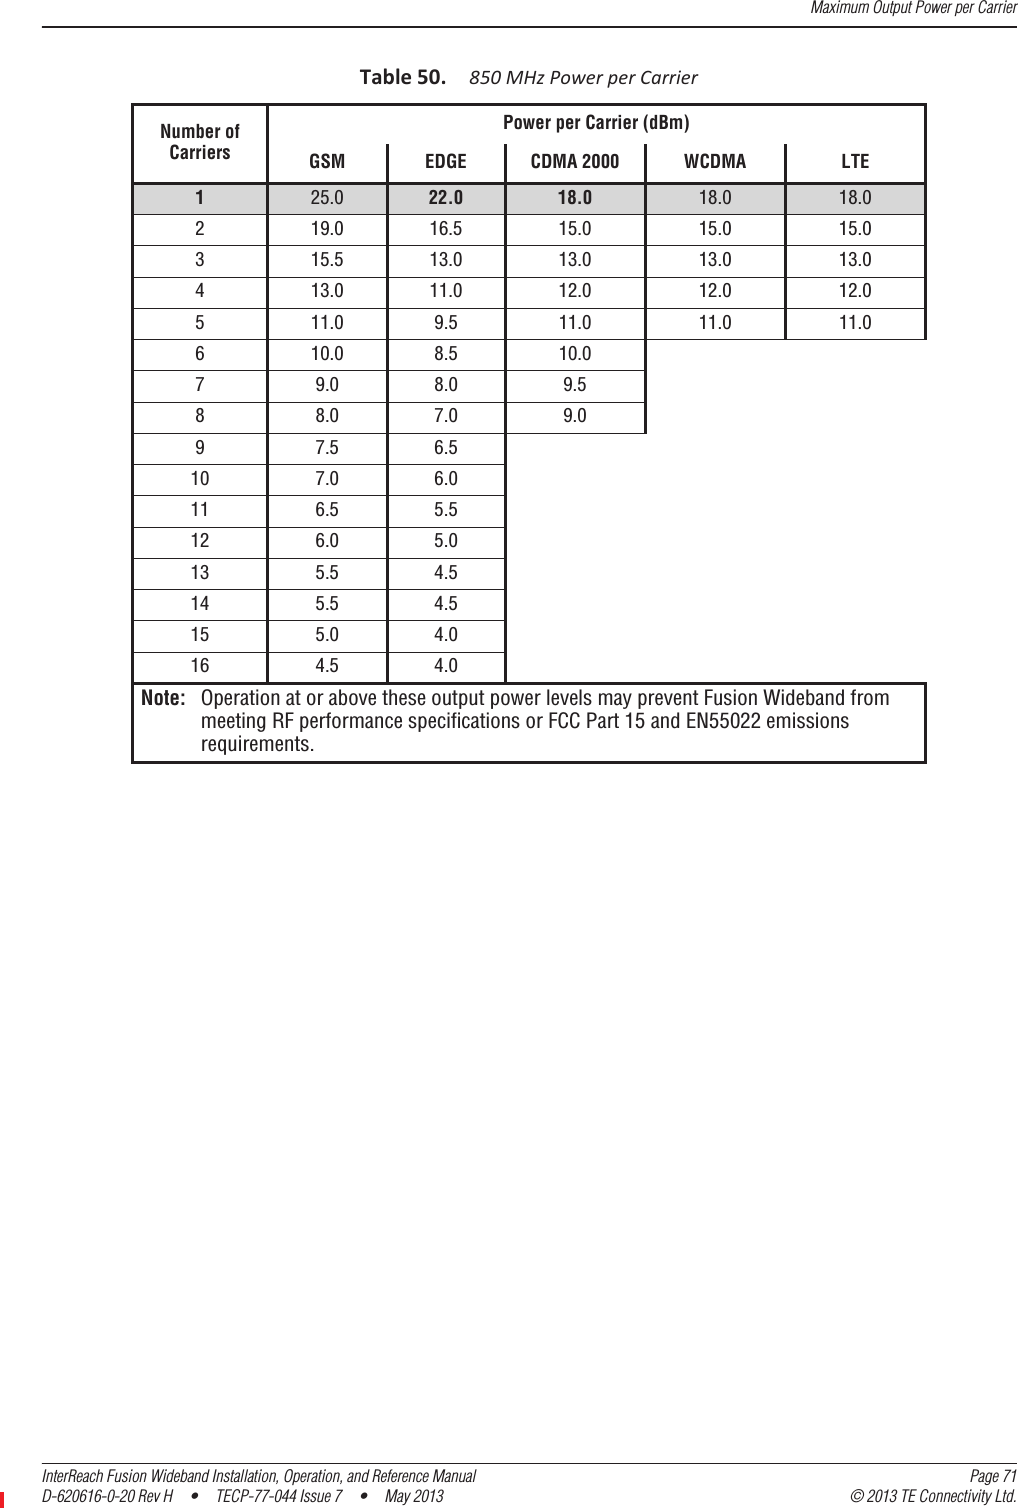 Maximum Output Power per CarrierInterReach Fusion Wideband Installation, Operation, and Reference Manual Page 71D-620616-0-20 Rev H  •  TECP-77-044 Issue 7  •  May 2013 © 2013 TE Connectivity Ltd.Table50.850MHzPowerperCarrierNumber ofCarriersPower per Carrier (dBm)GSM EDGE CDMA 2000 WCDMA LTE125.0 22.0 18.0 18.0 18.02 19.0 16.5 15.0 15.0 15.03 15.5 13.0 13.0 13.0 13.04 13.0 11.0 12.0 12.0 12.05 11.0 9.5 11.0 11.0 11.06 10.0 8.5 10.07 9.0 8.0 9.58 8.0 7.0 9.09 7.5 6.510 7.0 6.011 6.5 5.512 6.0 5.013 5.5 4.514 5.5 4.515 5.0 4.016 4.5 4.0Note: Operation at or above these output power levels may prevent Fusion Wideband from meeting RF performance specifications or FCC Part 15 and EN55022 emissions requirements. 